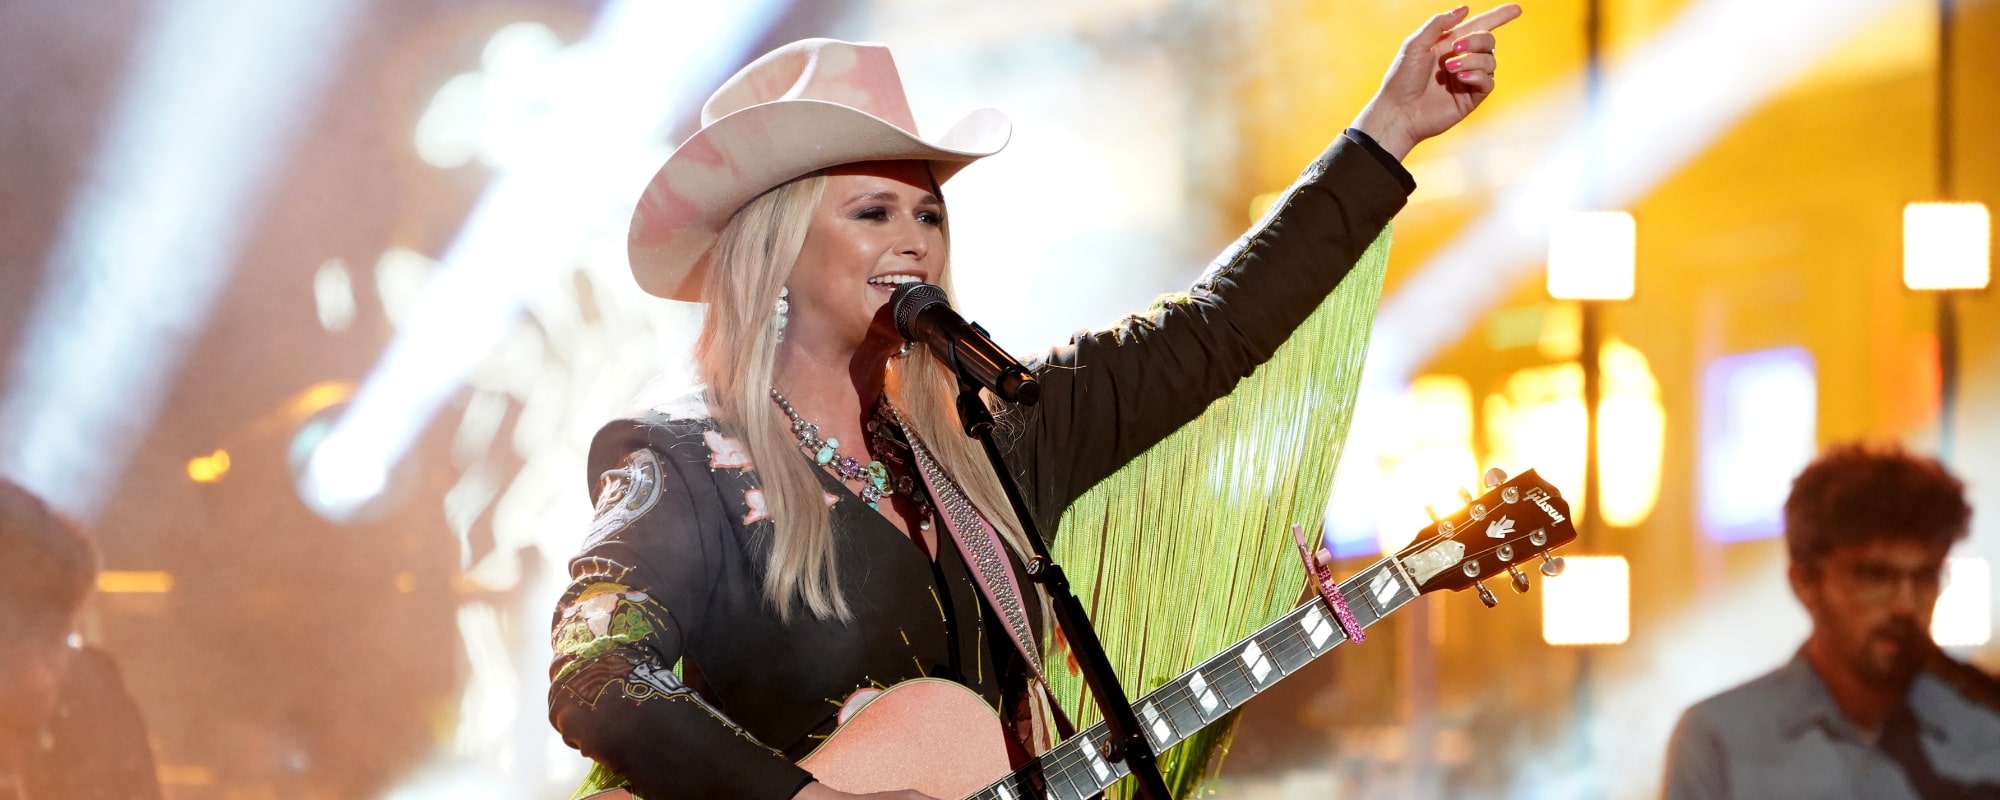 Miranda Lambert Reveals How Her Flaming Jacket Came to Be: “How Can We Be on Fire and Not Die?”